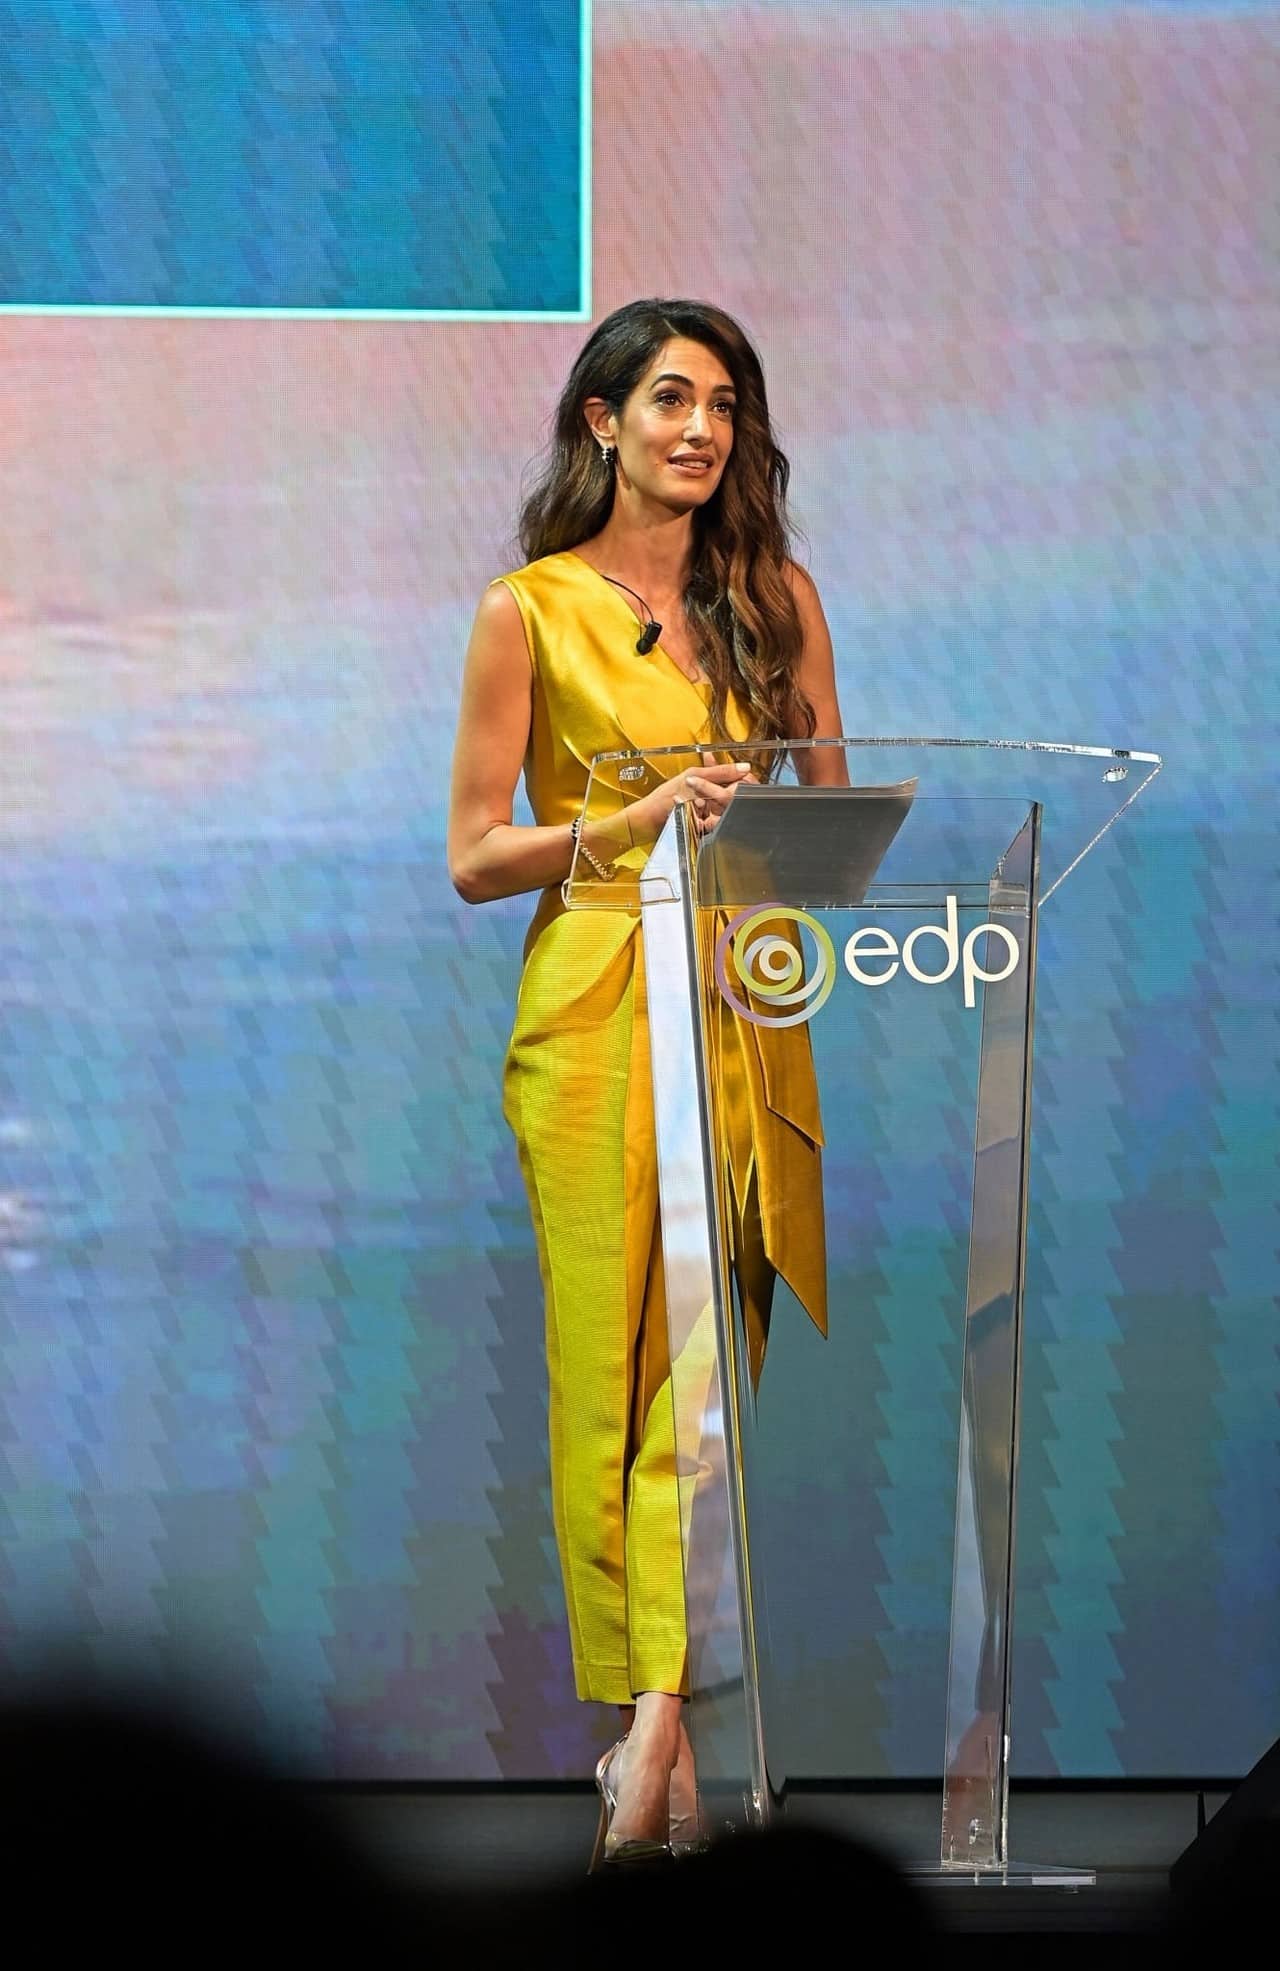 Amal Clooney Radiates Elegance at We Choose Earth Tour Conference